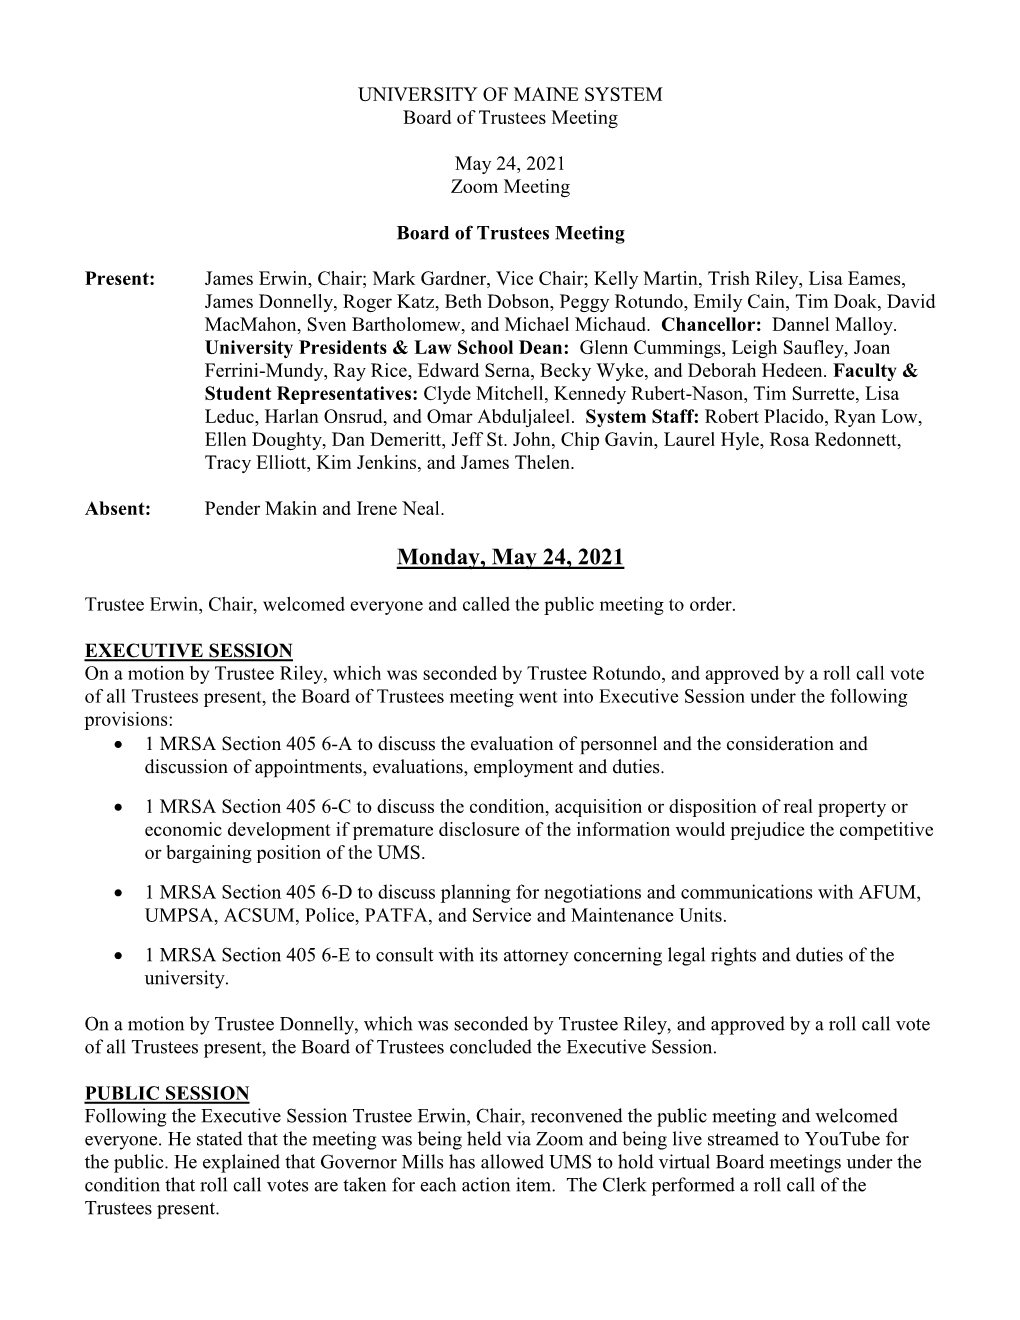 Board of Trustees Meeting May 18-19 2014.Docx